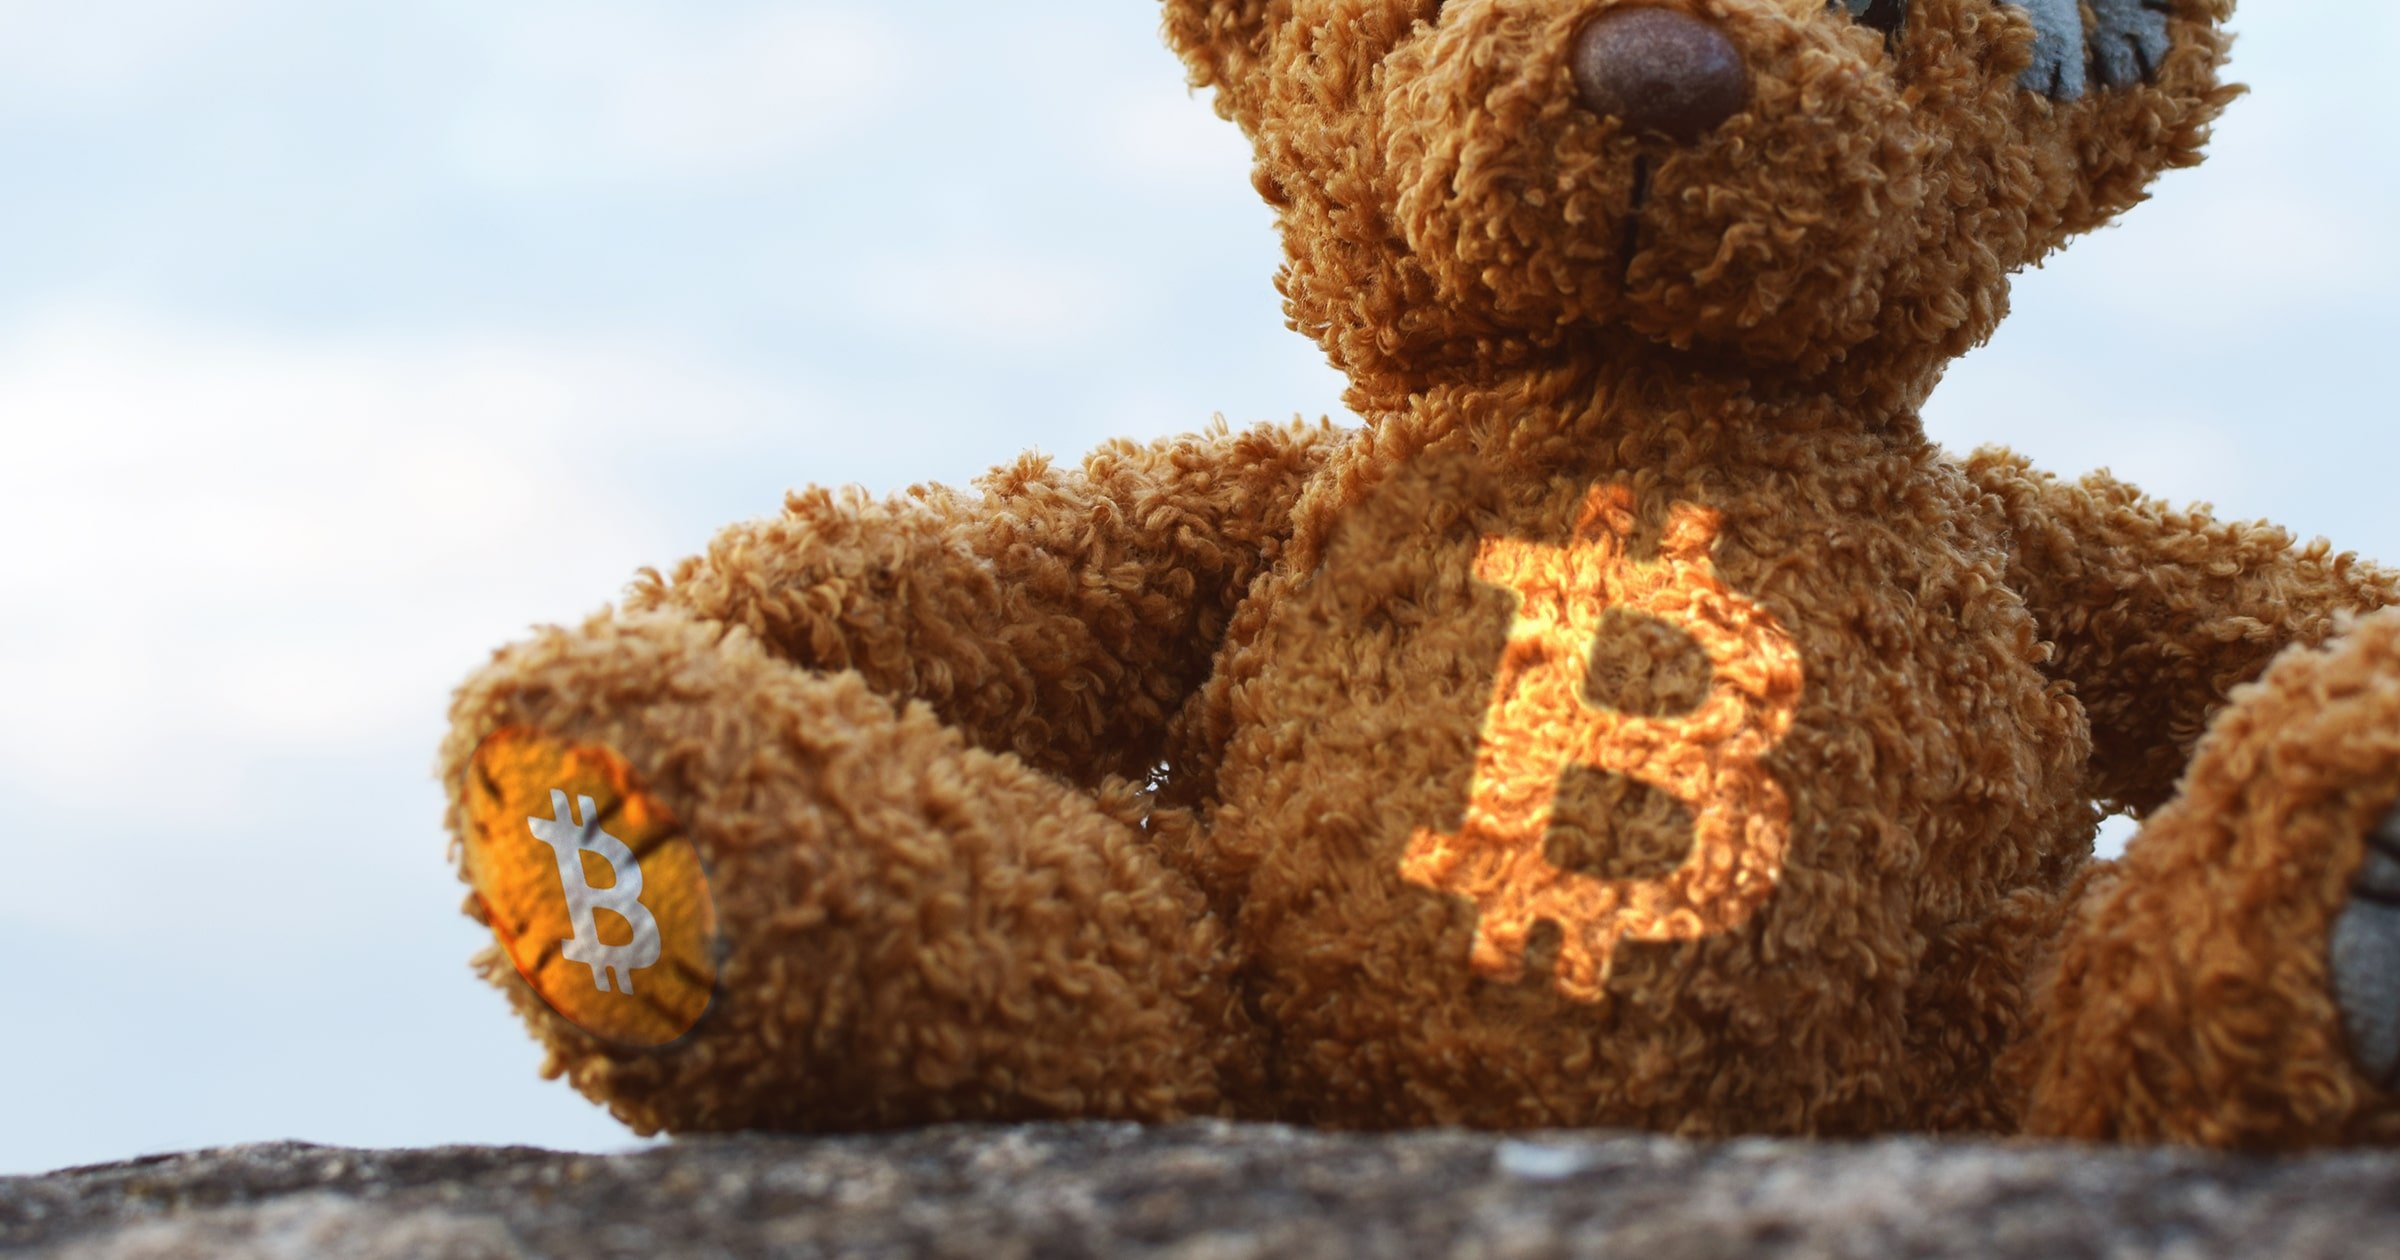 BTC analysis – what is the most bearish scenario and where can the price bounce?